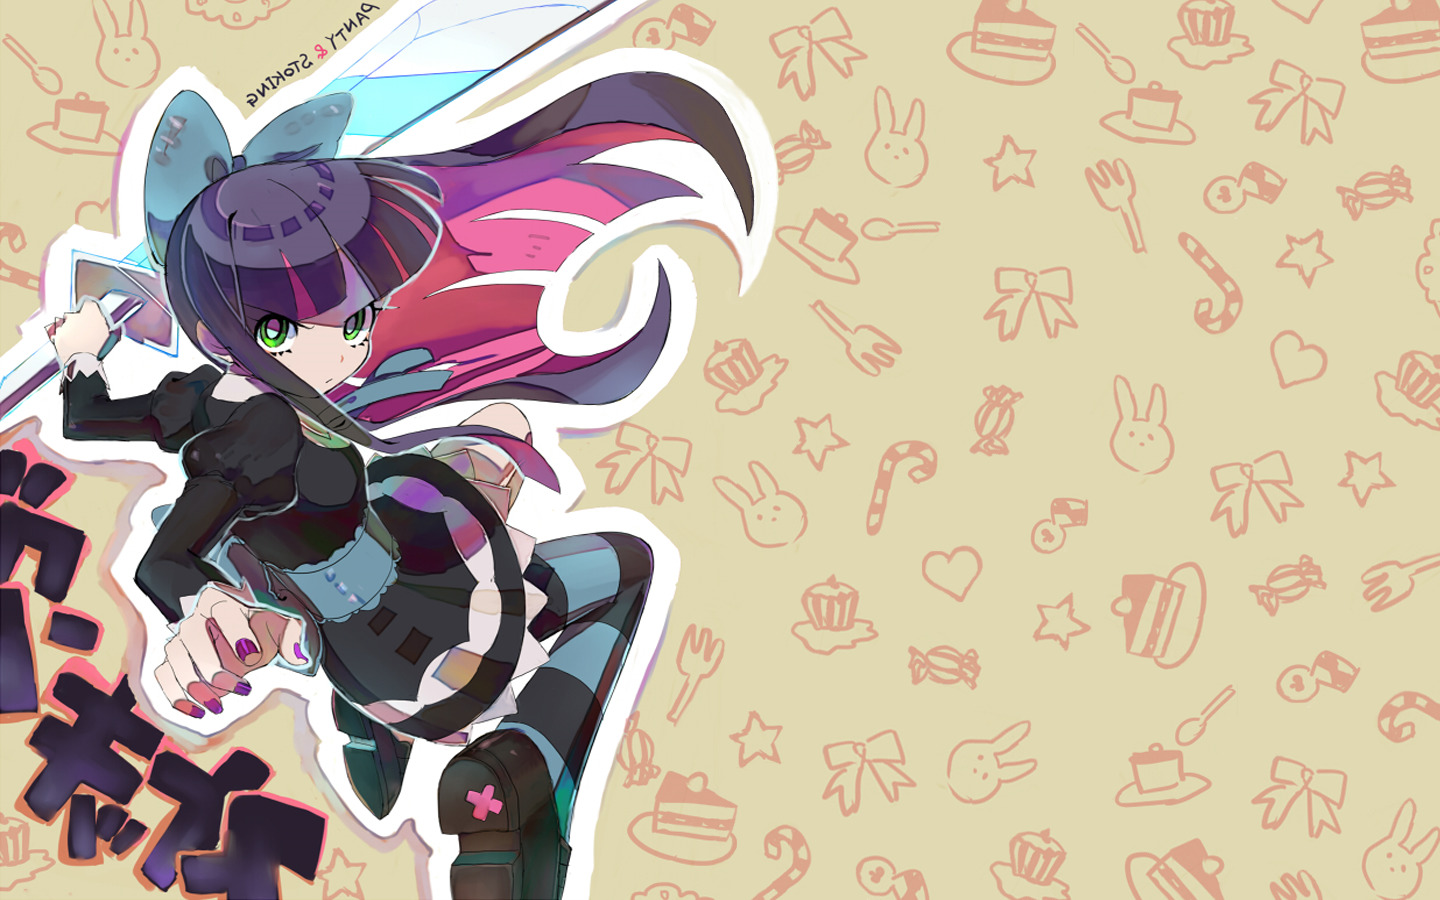 Panty And Stocking With Garterbelt, Angel, Anime, Anime Girls, Stockings, Anarchy Stocking, Cakes, Hearts, Ribbon Wallpaper